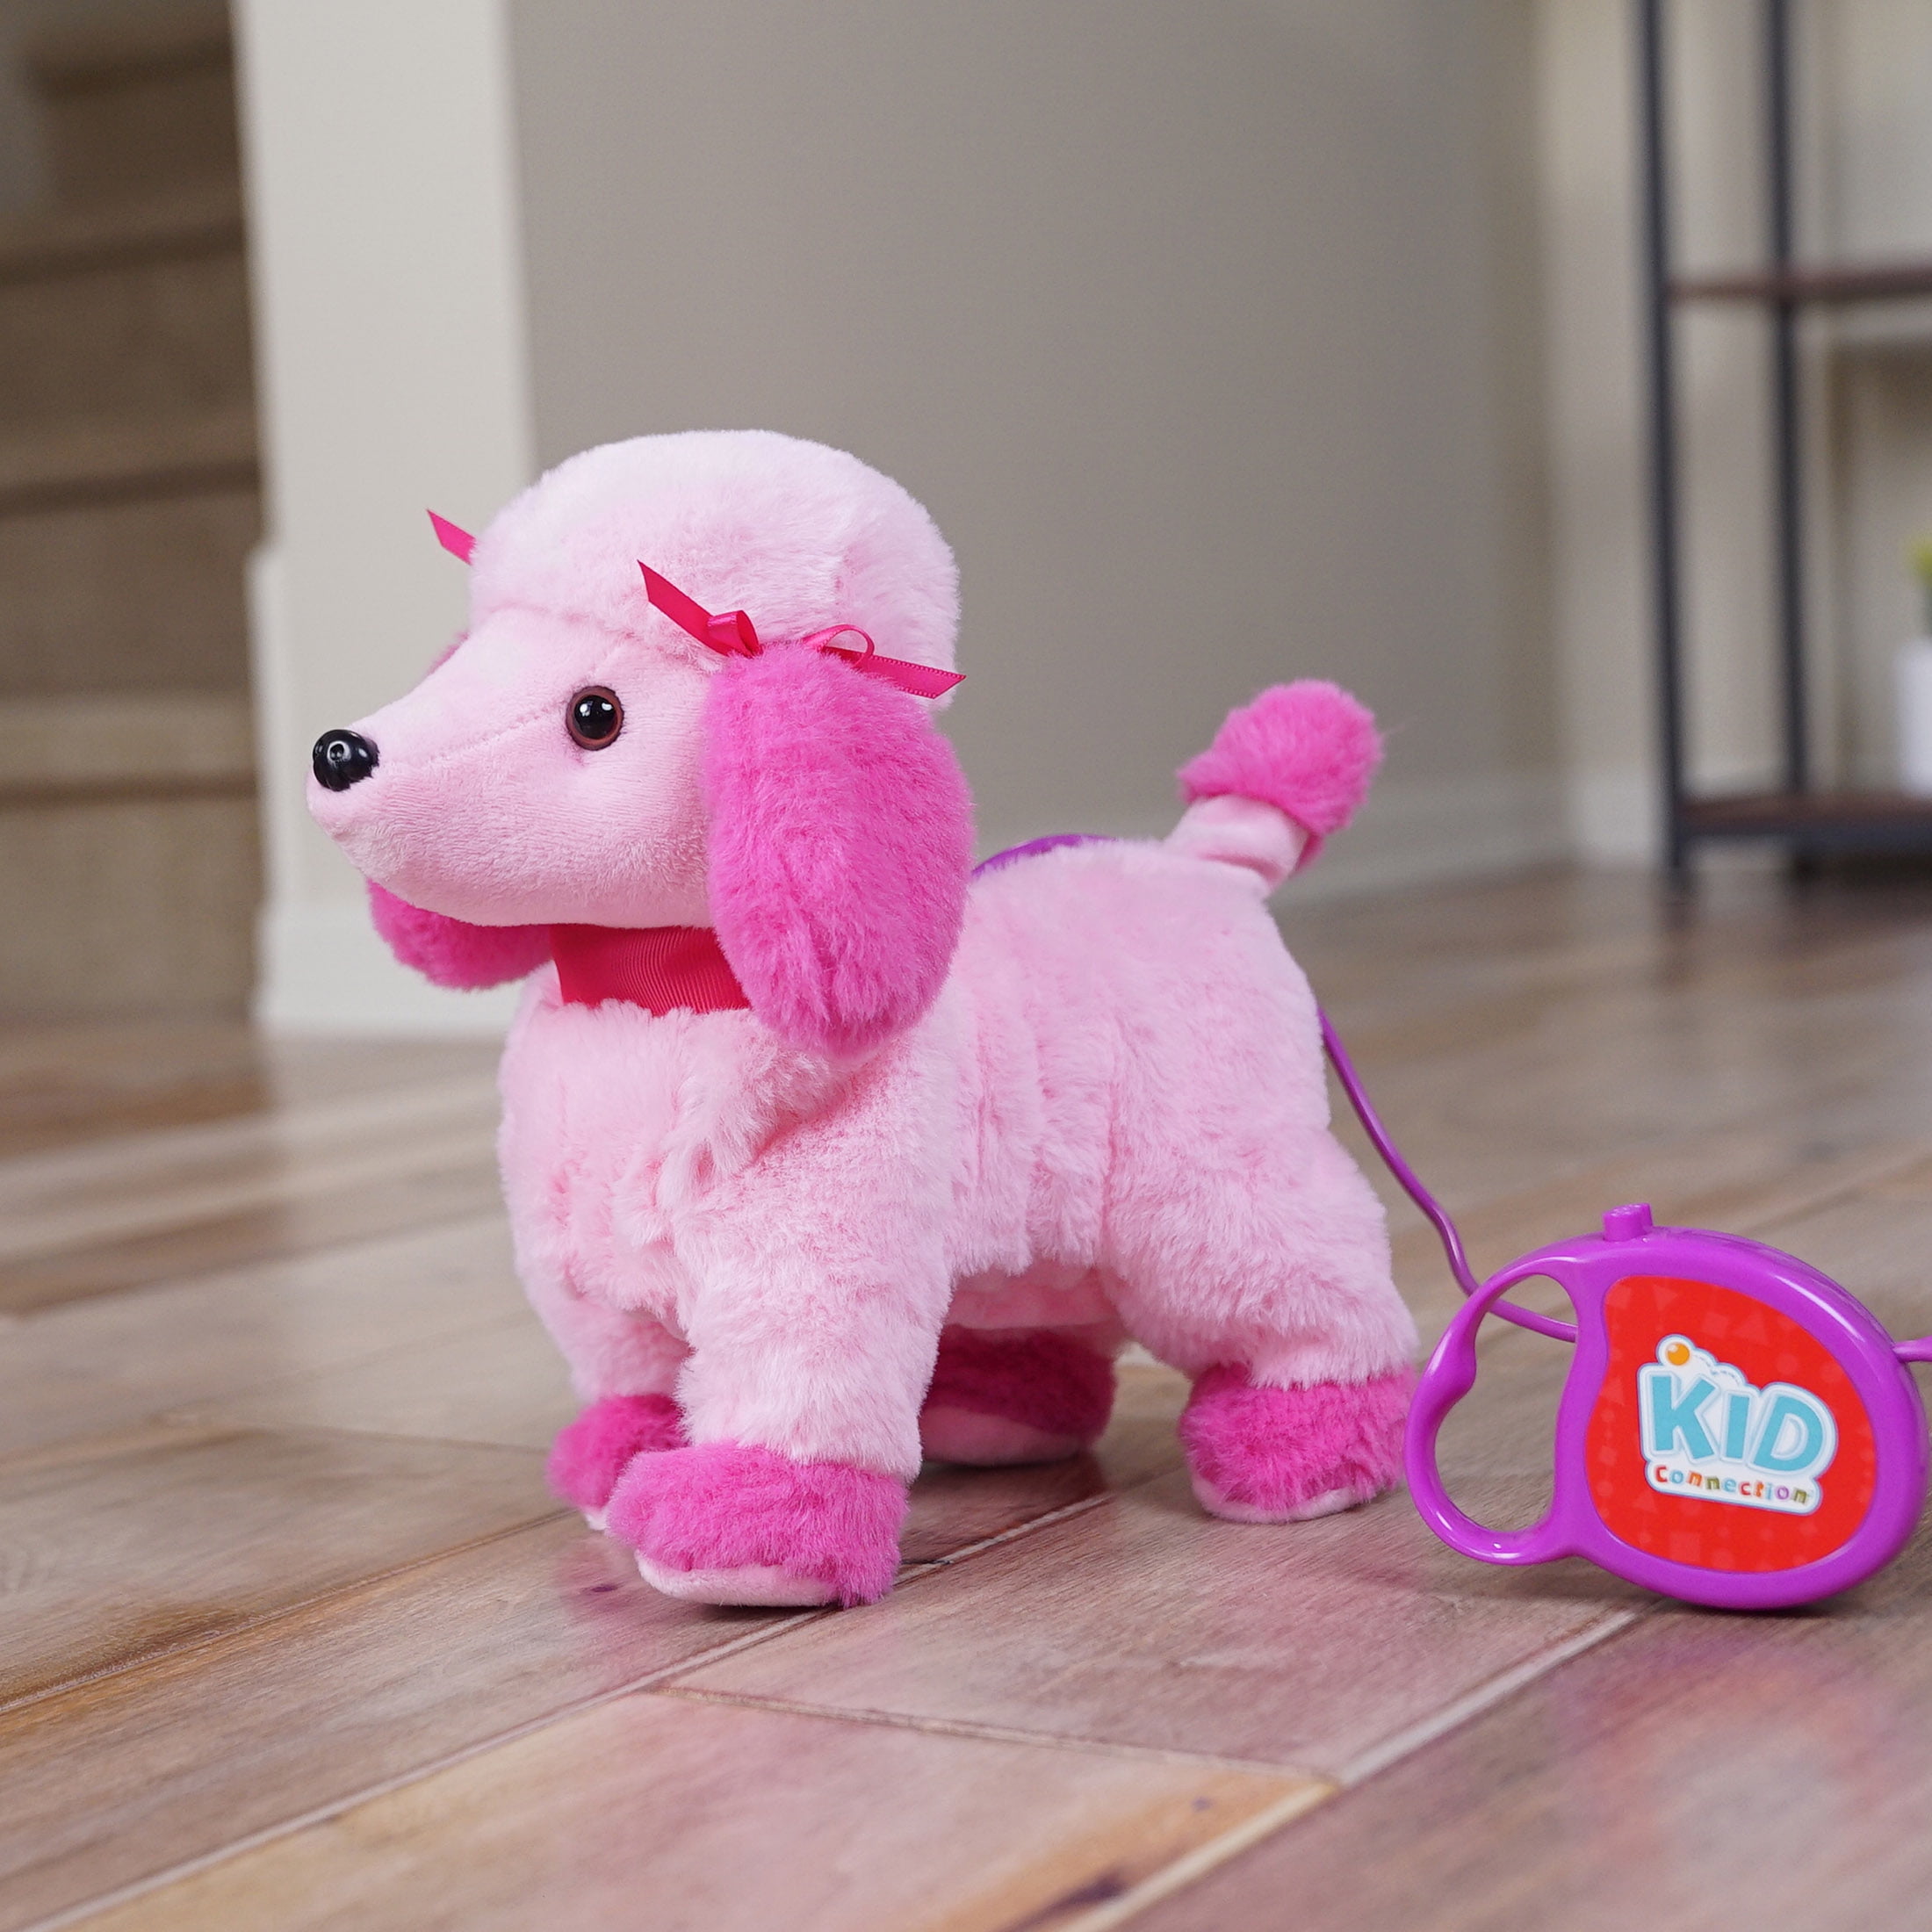 Toy Pink Poodle Puppy Dog on Leash Dances Walks Wags Tail to Pop Songs 9" 